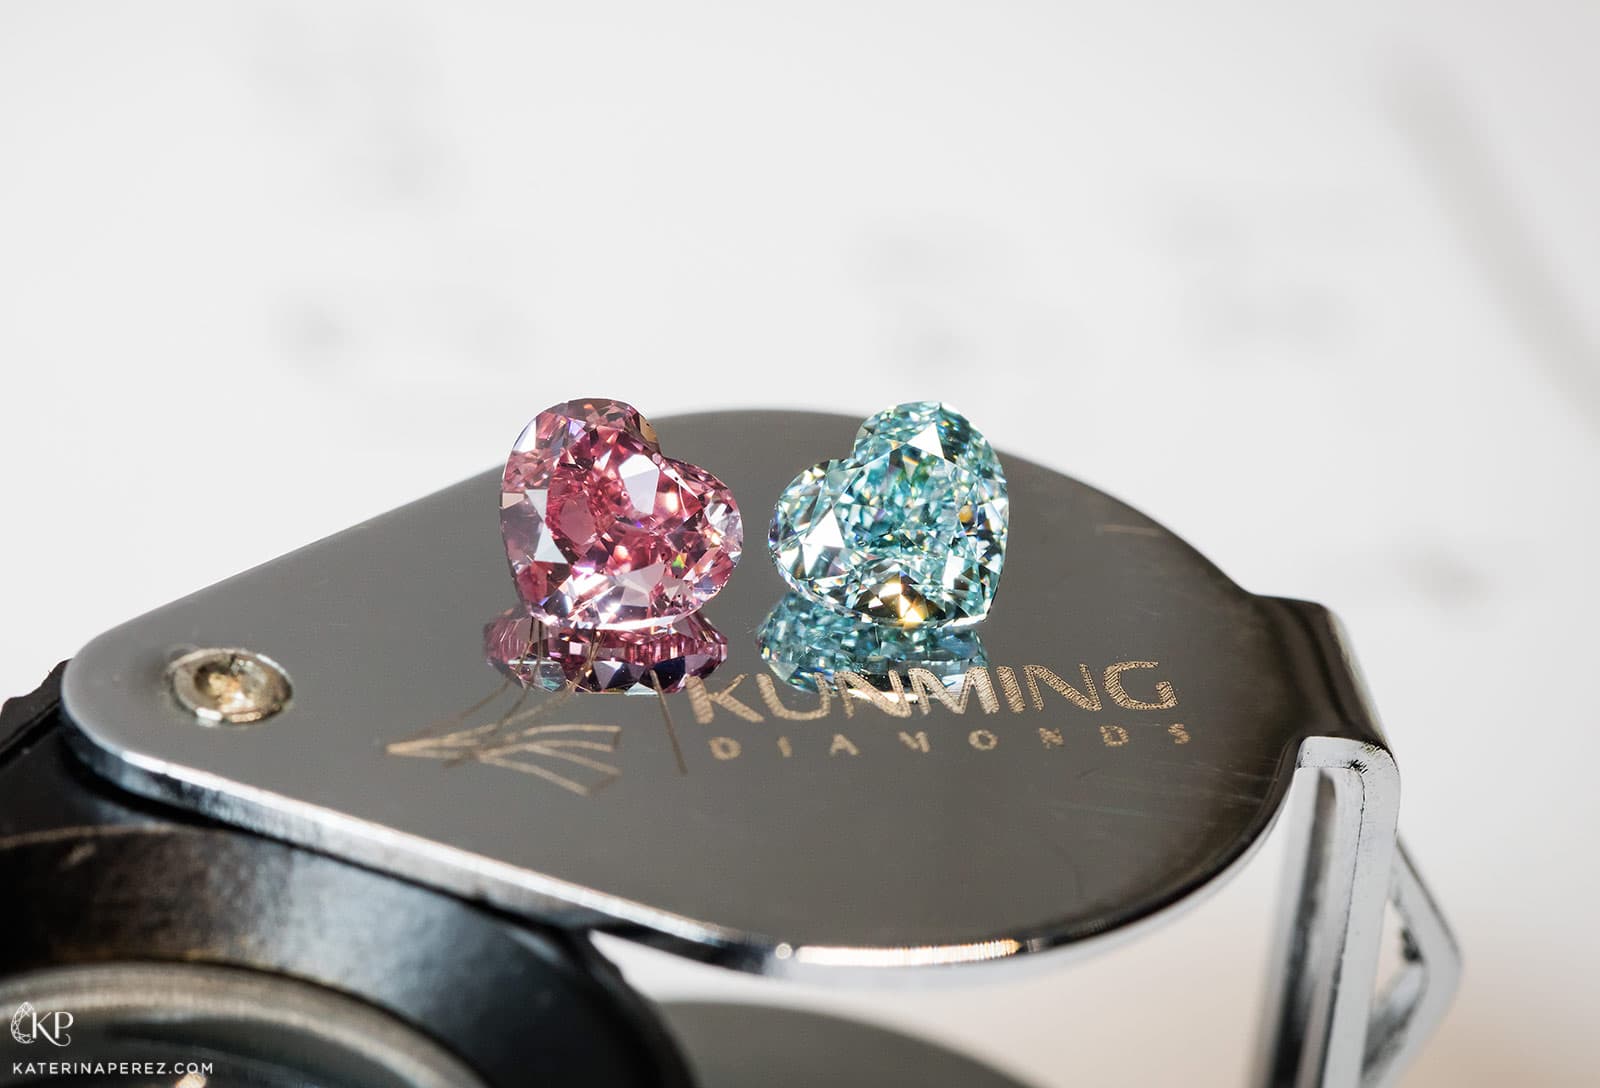 Kunming Diamonds 0,71 cts fancy intense pink and 0,72 cts fancy intense blue diamonds. Photo by Simon Martner